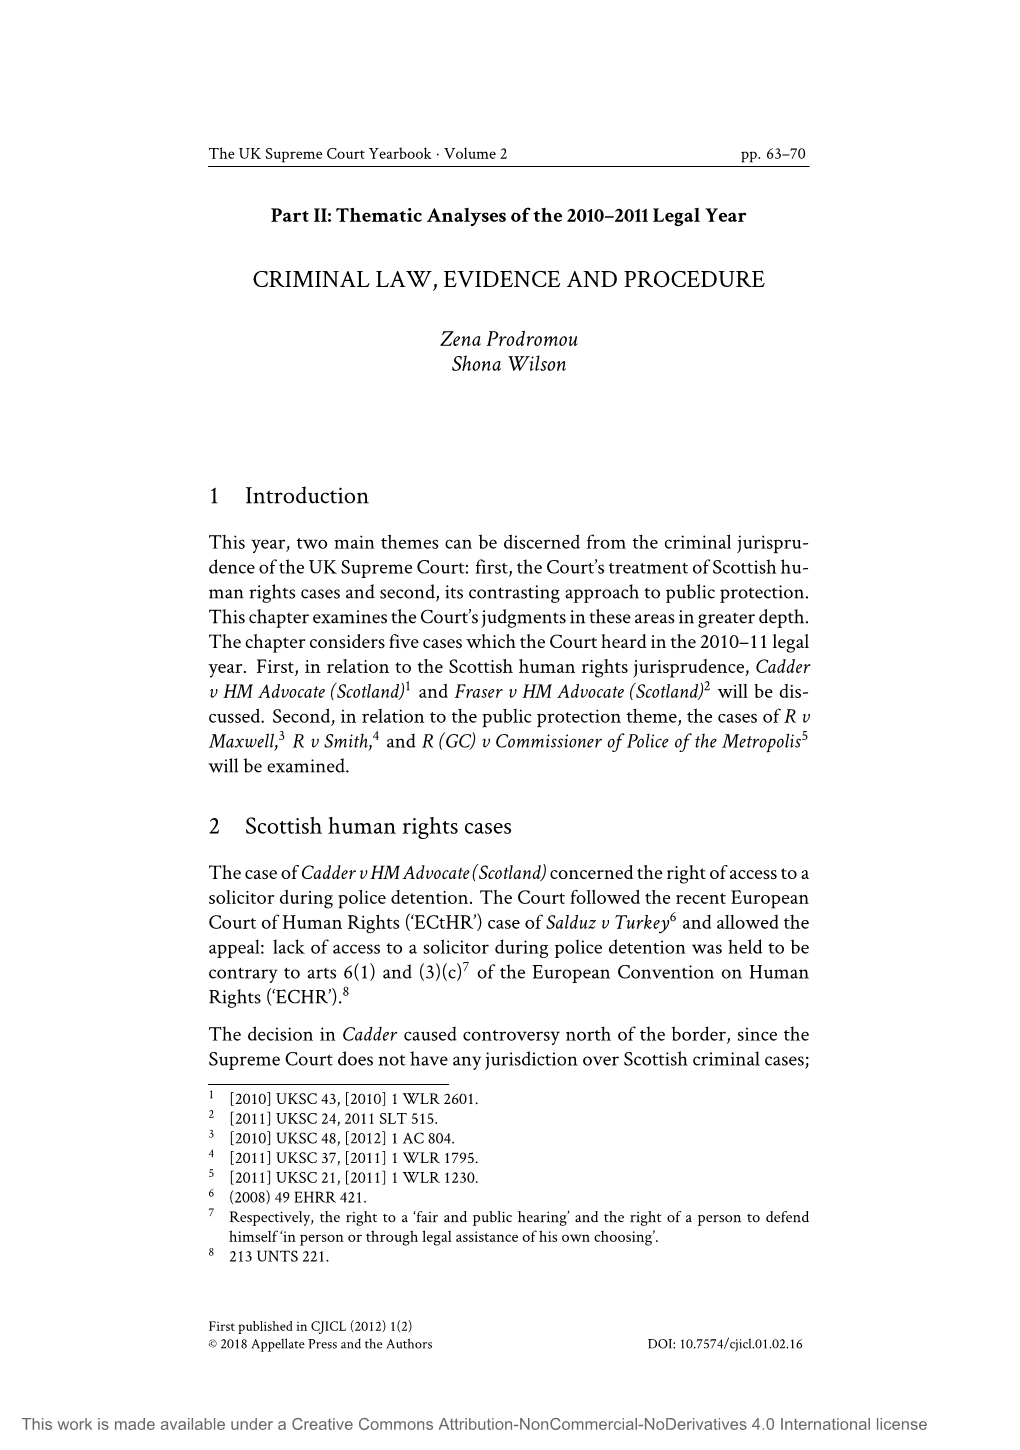 Criminal Law, Evidence and Procedure 1